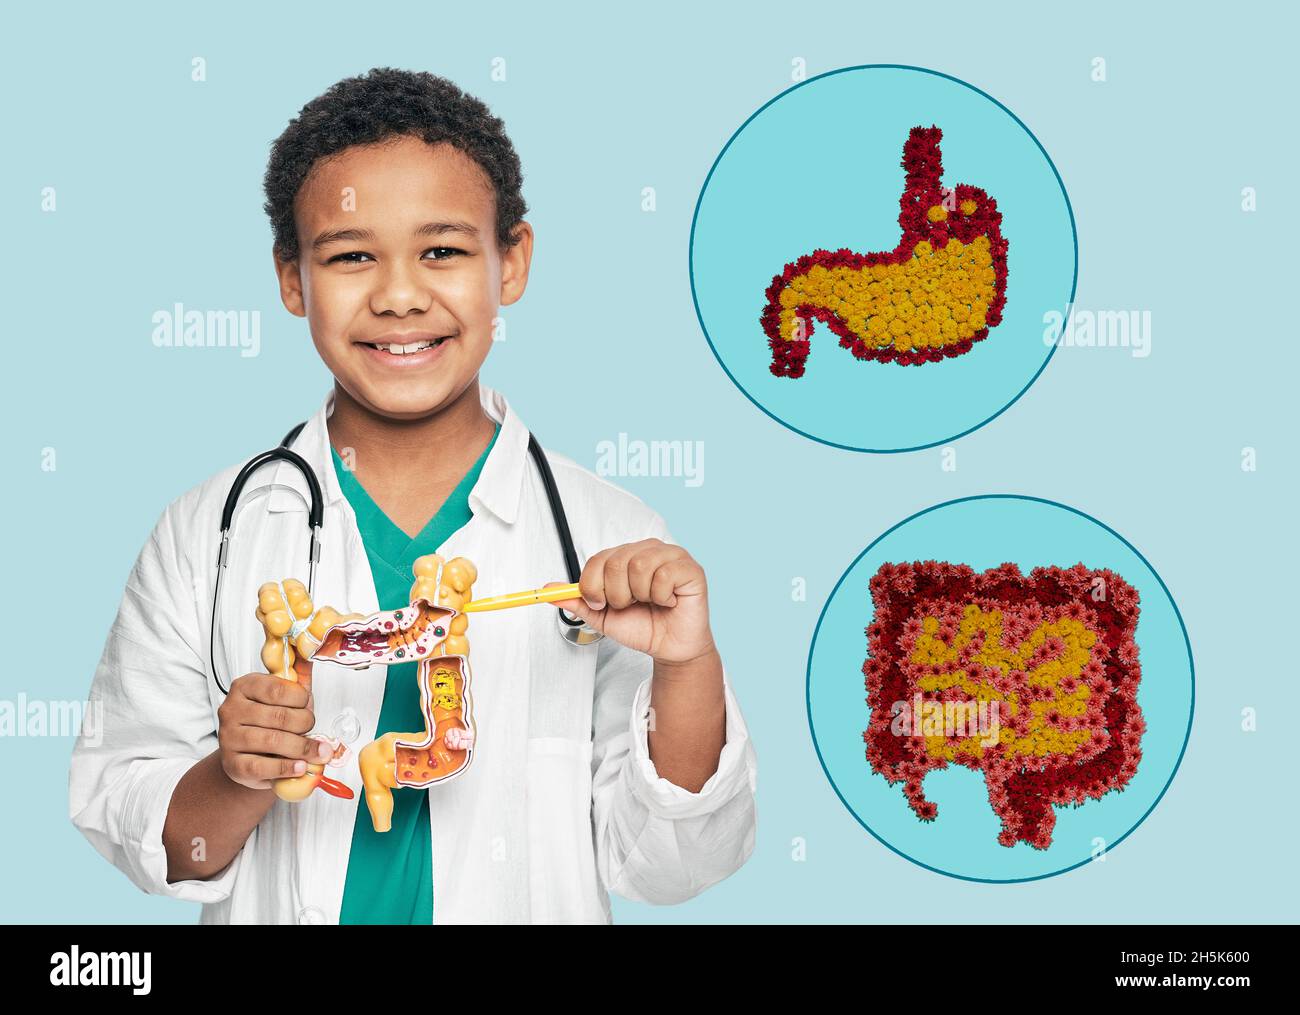 Child's digestive system health. African boy points on anatomical intestines model near icons of intestines and stomach on blue background Stock Photo